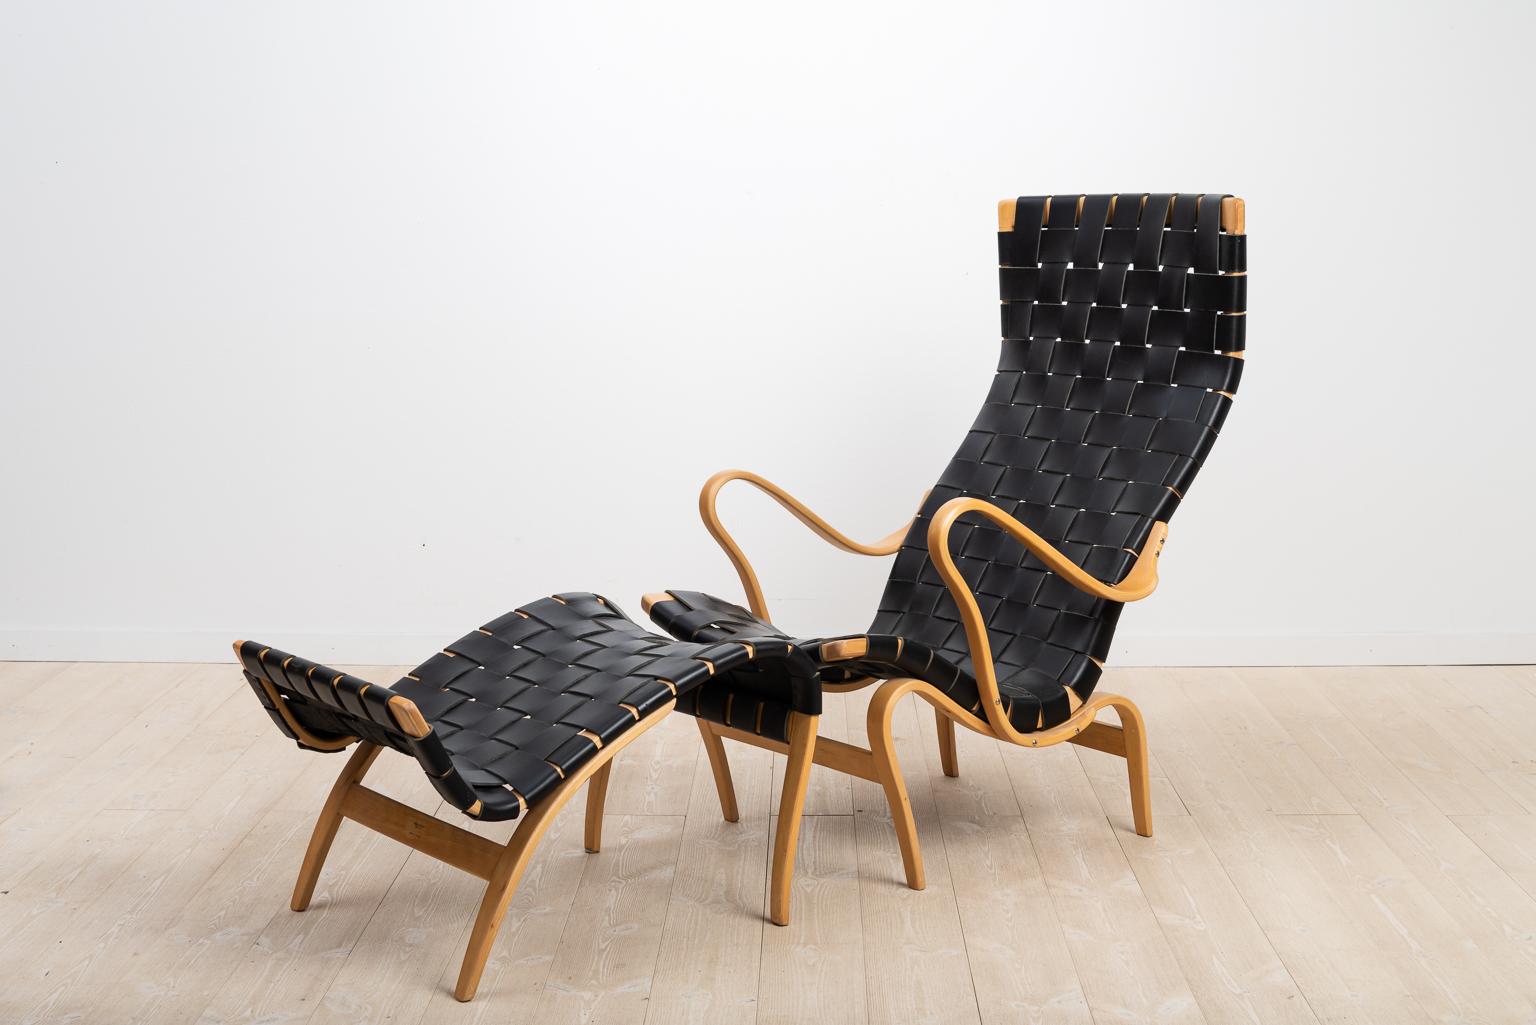 Bruno Matsson lounge chair Pernilla 2 and ottoman Pernilla 69. Designed by Matsson 1944. Both pieces are marked with authenticity stamps. The chair and ottoman are newly renovated and the black leather straps are new.